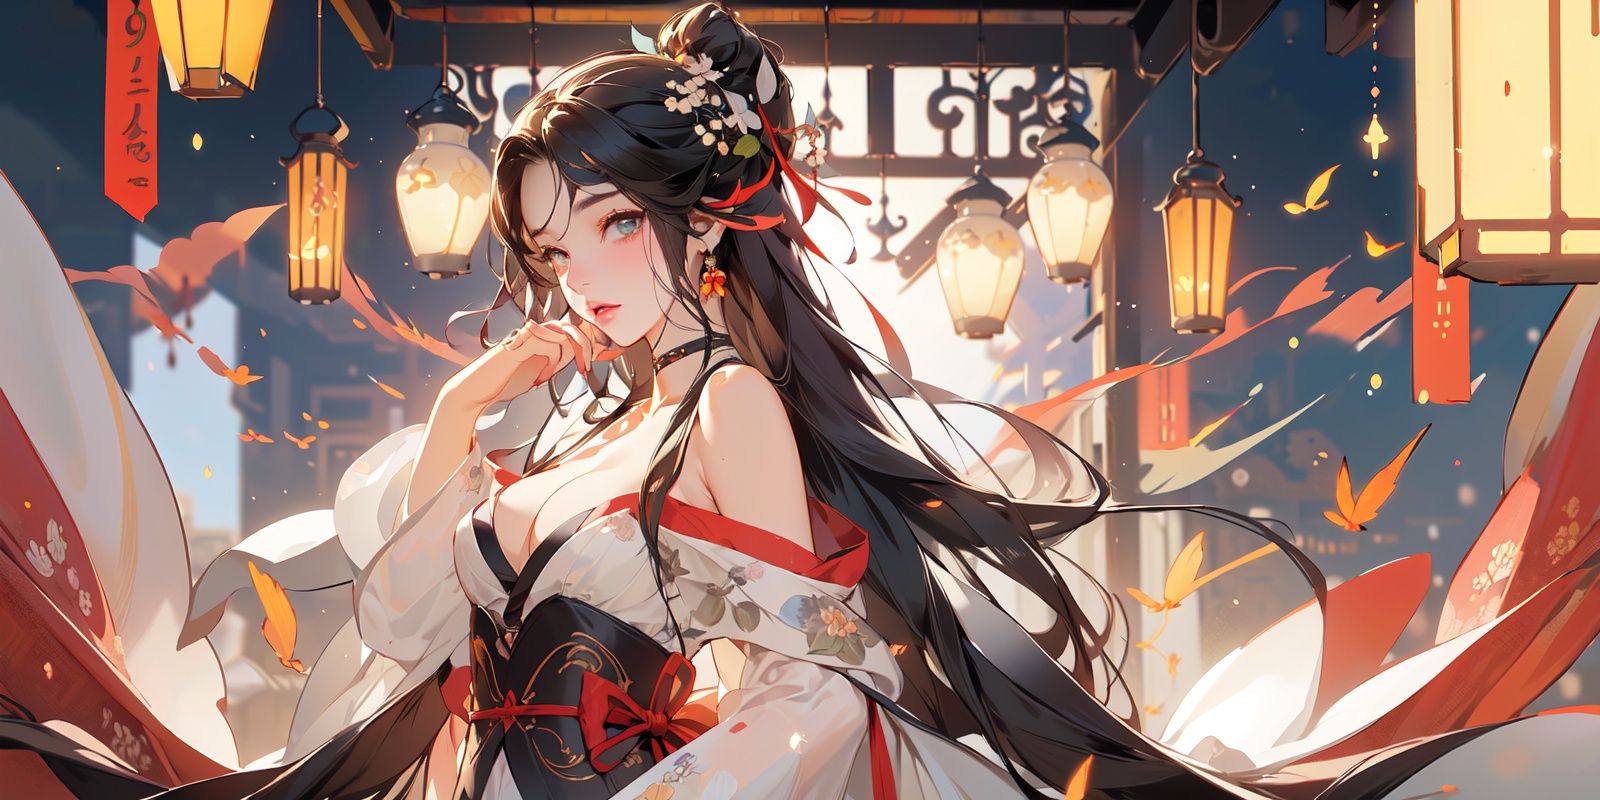 nsfw,(Masterpiece:1.2, high quality), (pixiv:1.4),cowboy shot, Eyebrows like willow leaves, ,The face is as beautiful as a flower, the eyes are tender. Small waist, big breasts, revealing cleavage; Lips slightly open, seductive expression. <lora:Chinese style_20230608163116-000018:0.8>